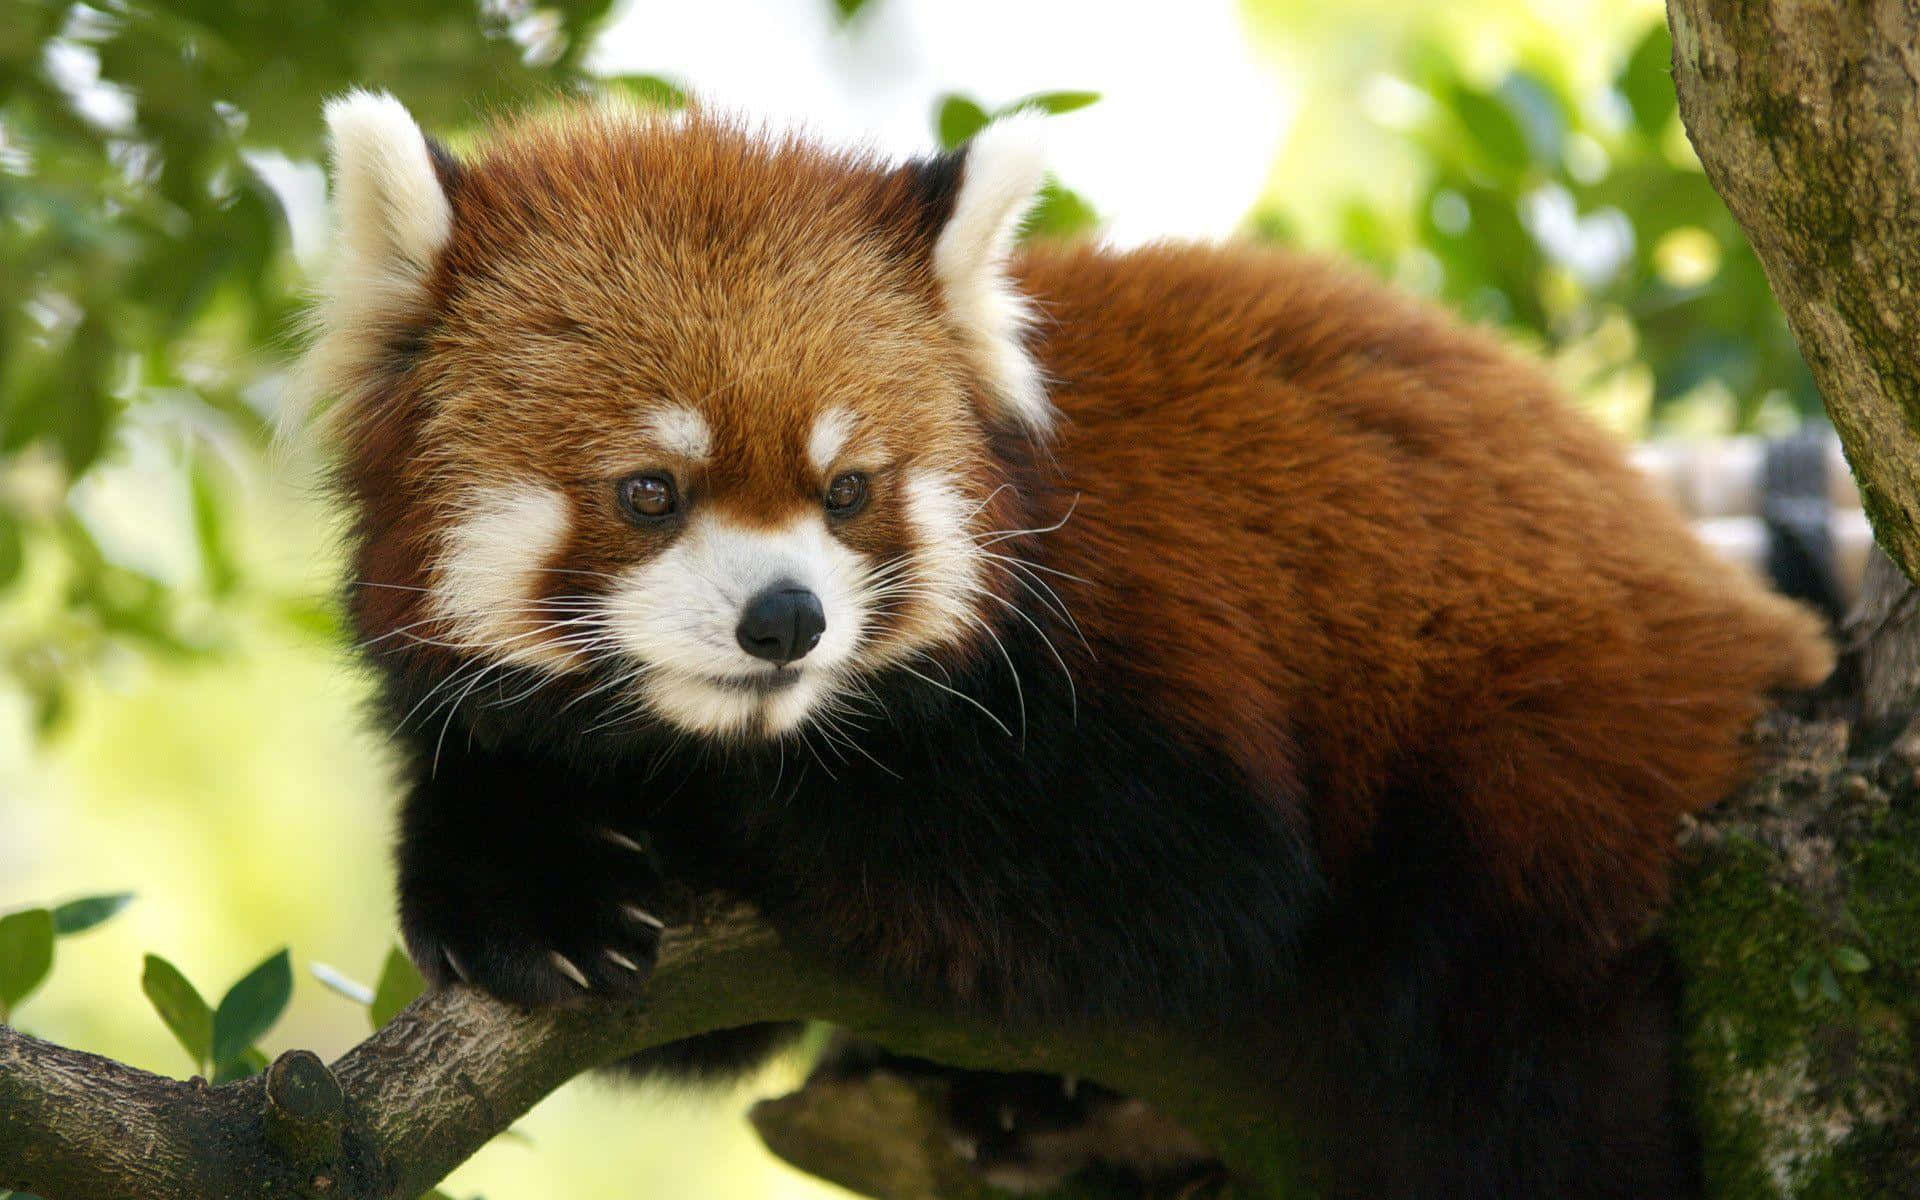 A Red Panda Enjoying the Day in its Natural Environment